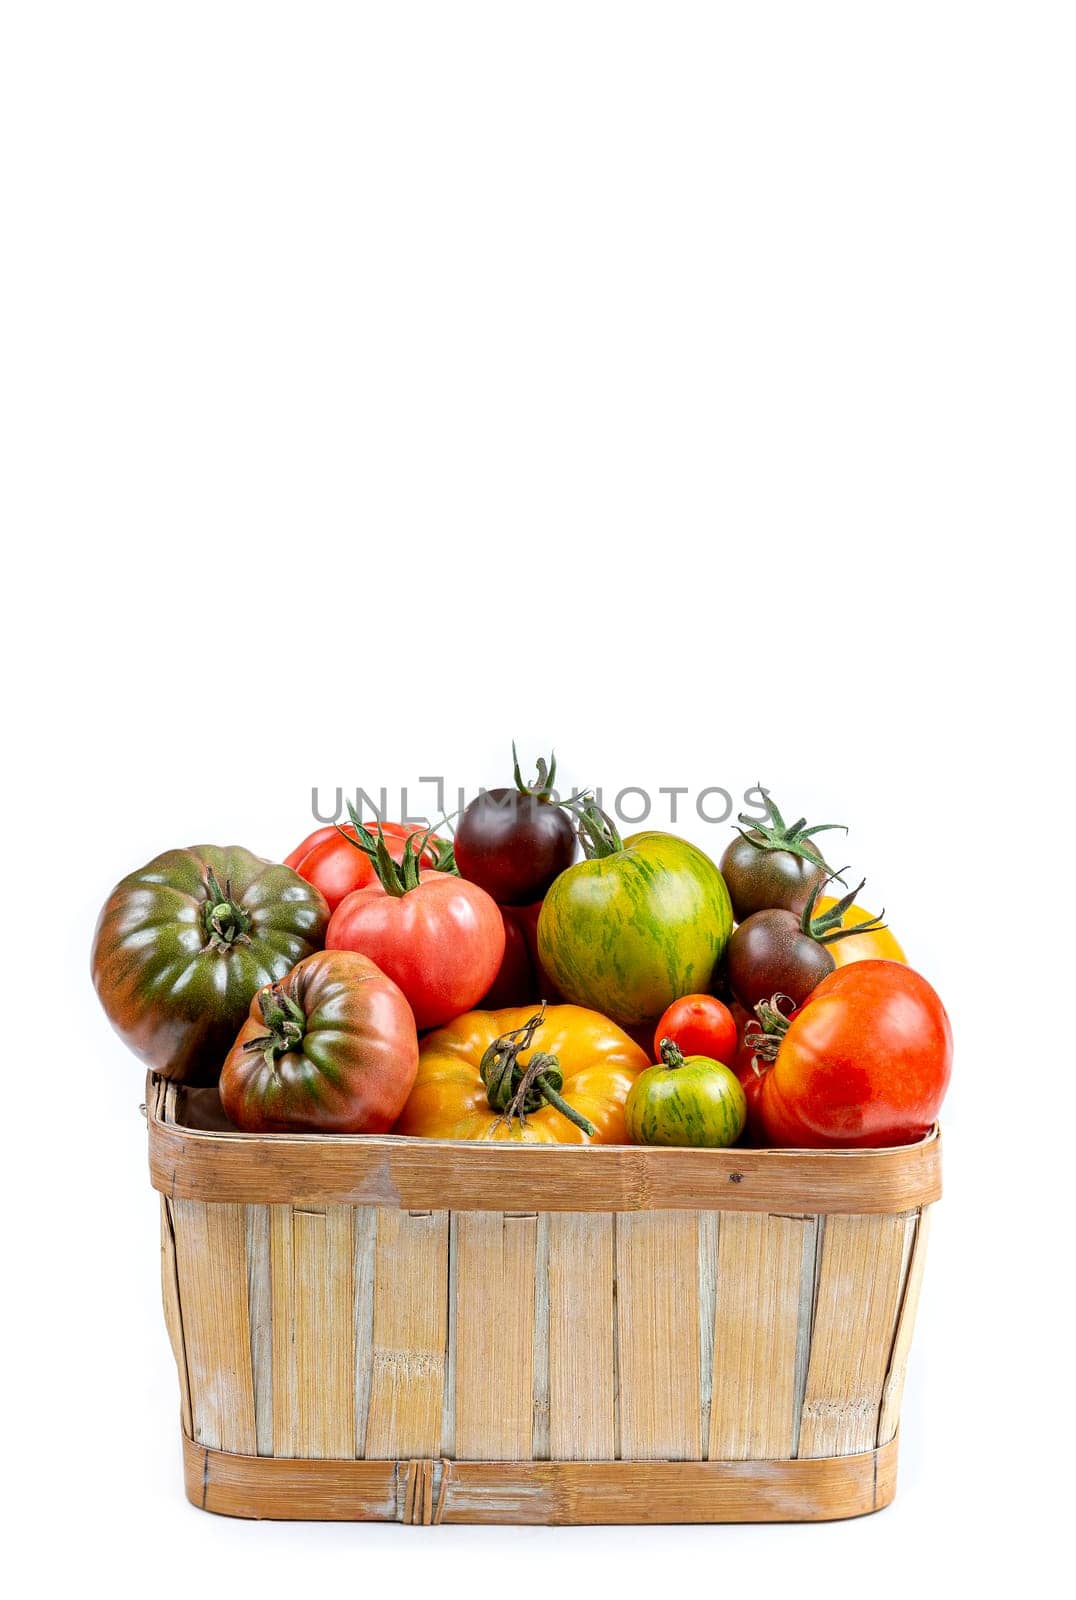 Basket full of freshly harvested heirloom and heritage tomatoes over white backgrond Multicoloured, red, green, black, purple, orange and yellow tomatoes ready to eat by JPC-PROD